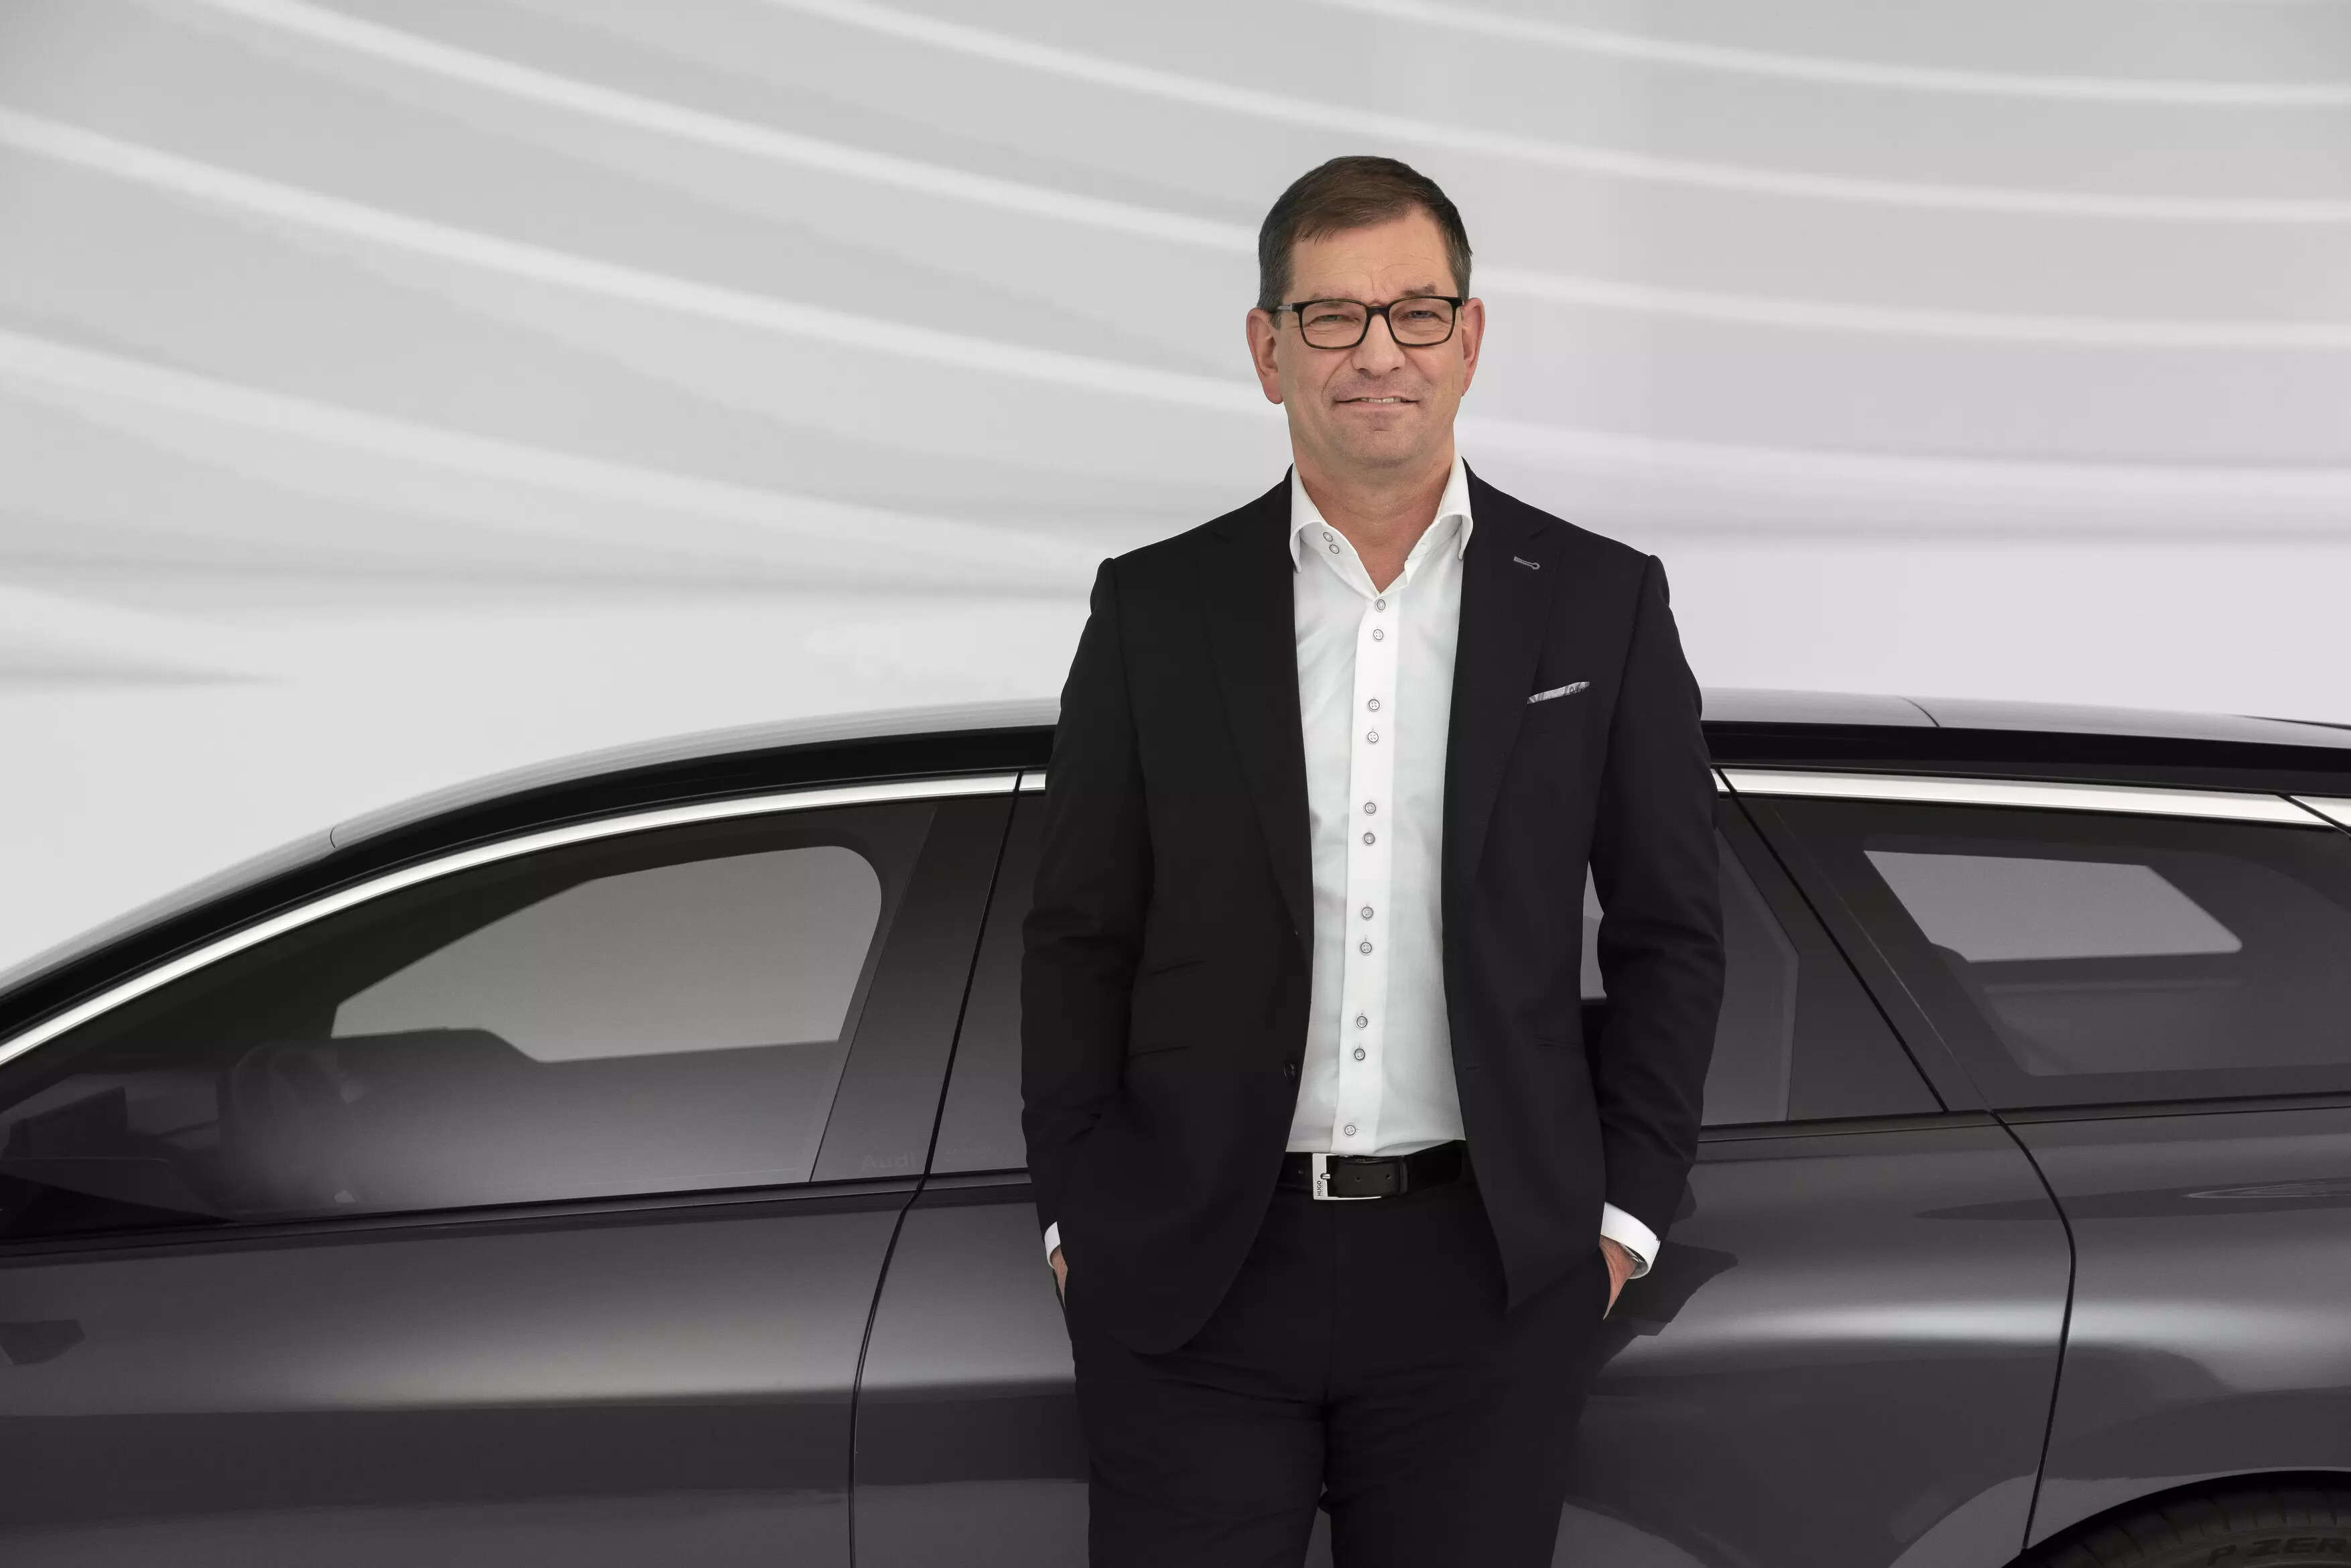  Markus Duesmann, Chairman of the Board of Management, AUDI AG